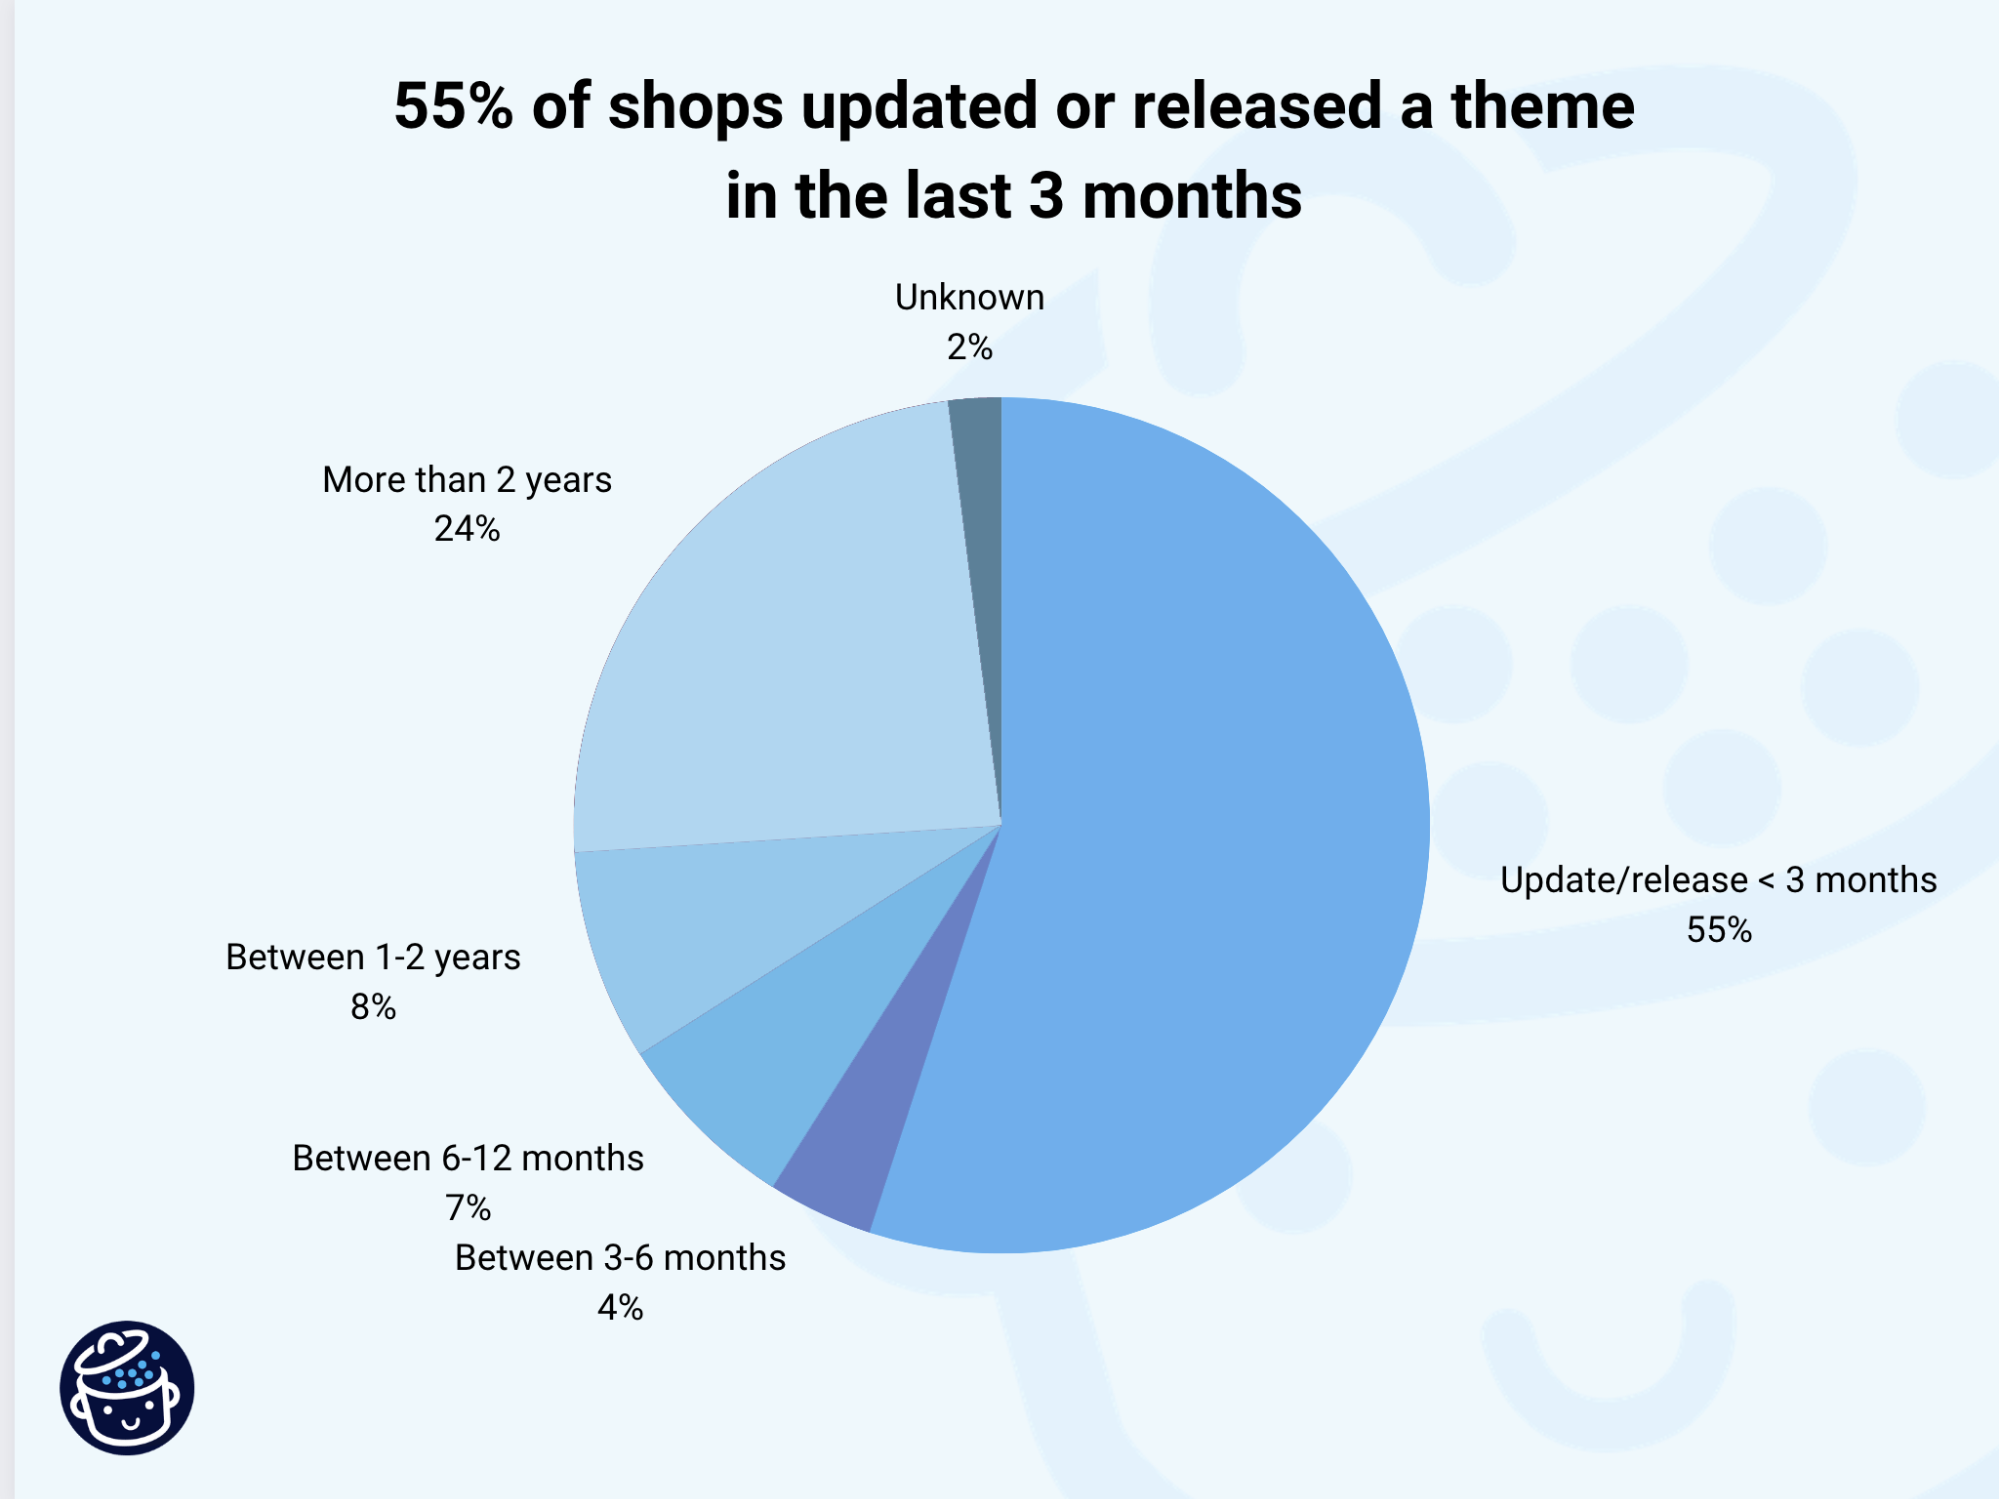 Theme shops updated or released a theme in the last 3 months.